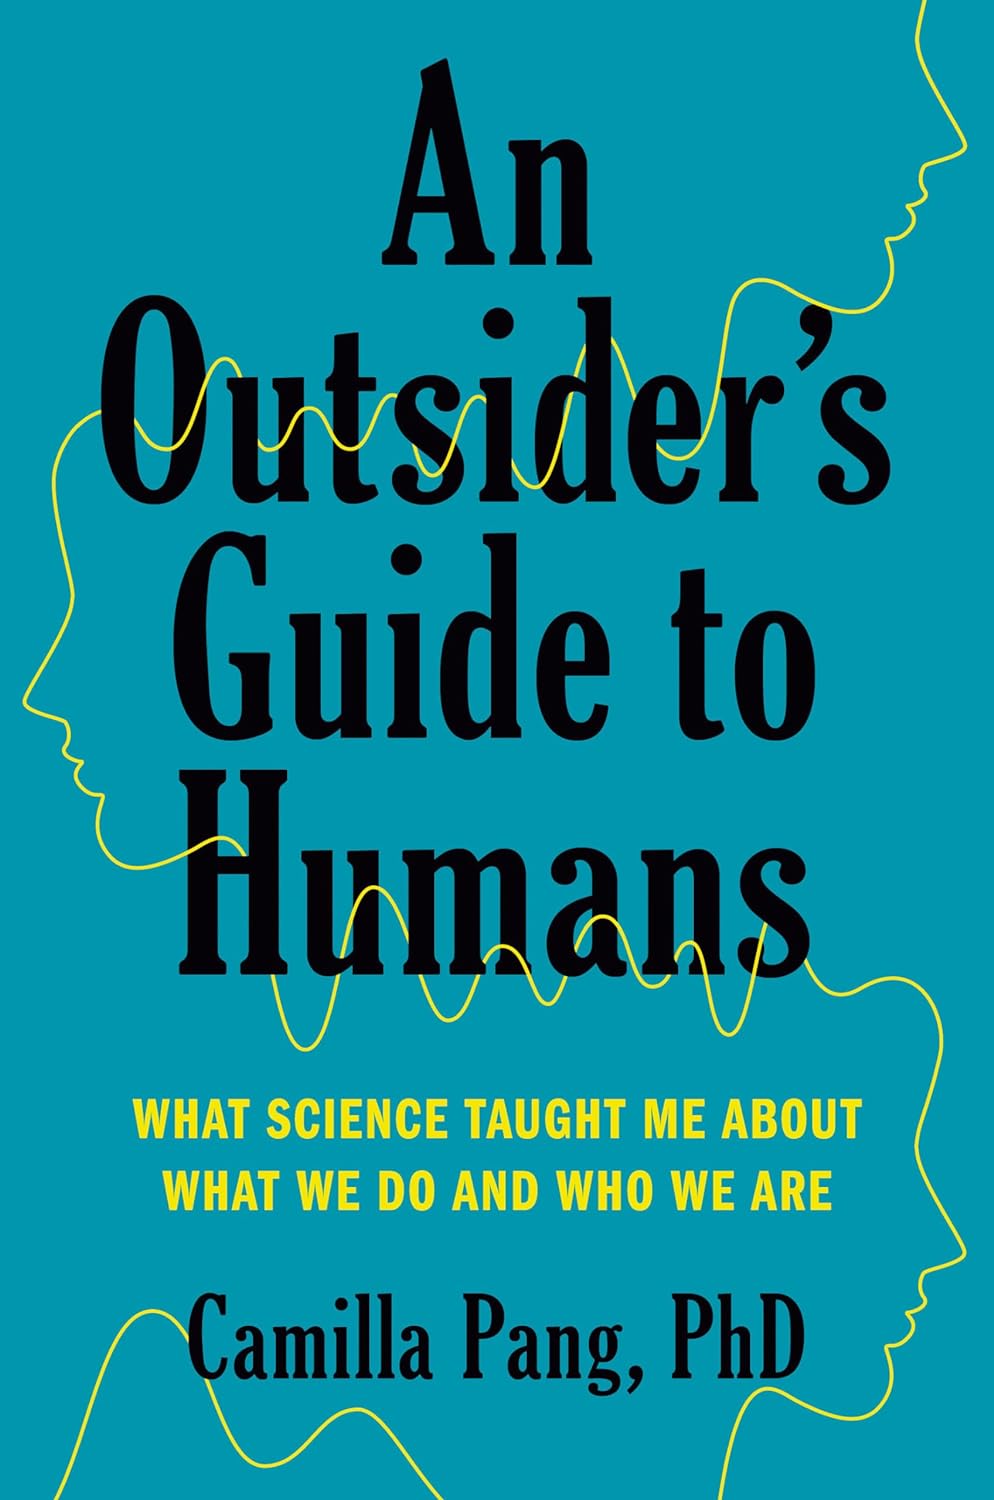 An Outsider's Guide to Humans: What Science Taught Me About What We Do and Who We Are.